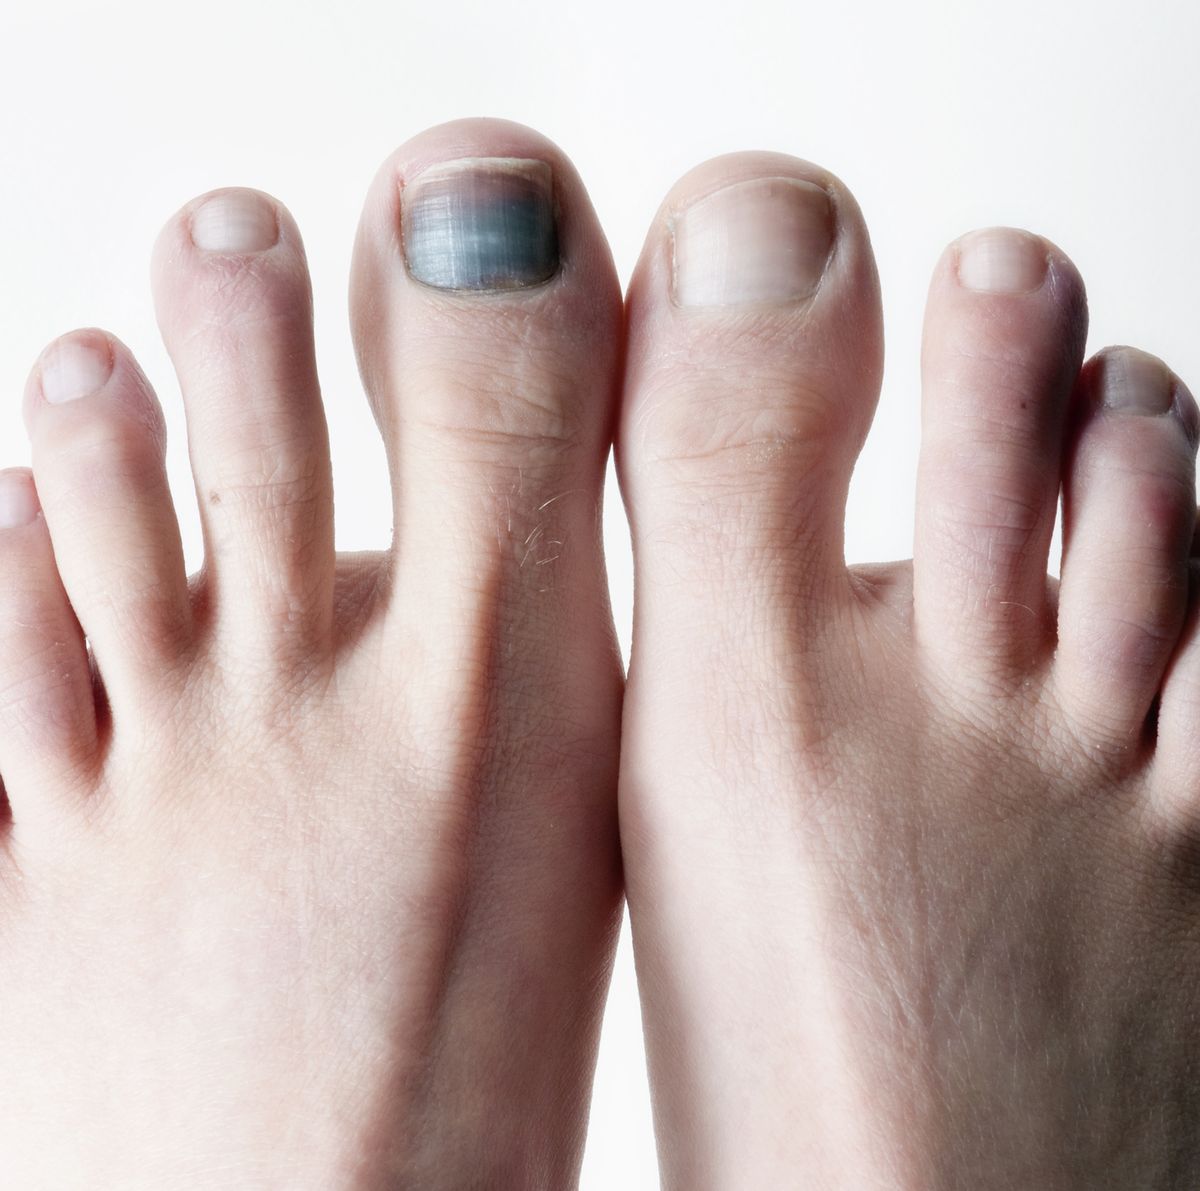 Black Toenails: Causes, Prevention Tips, and How to Treat